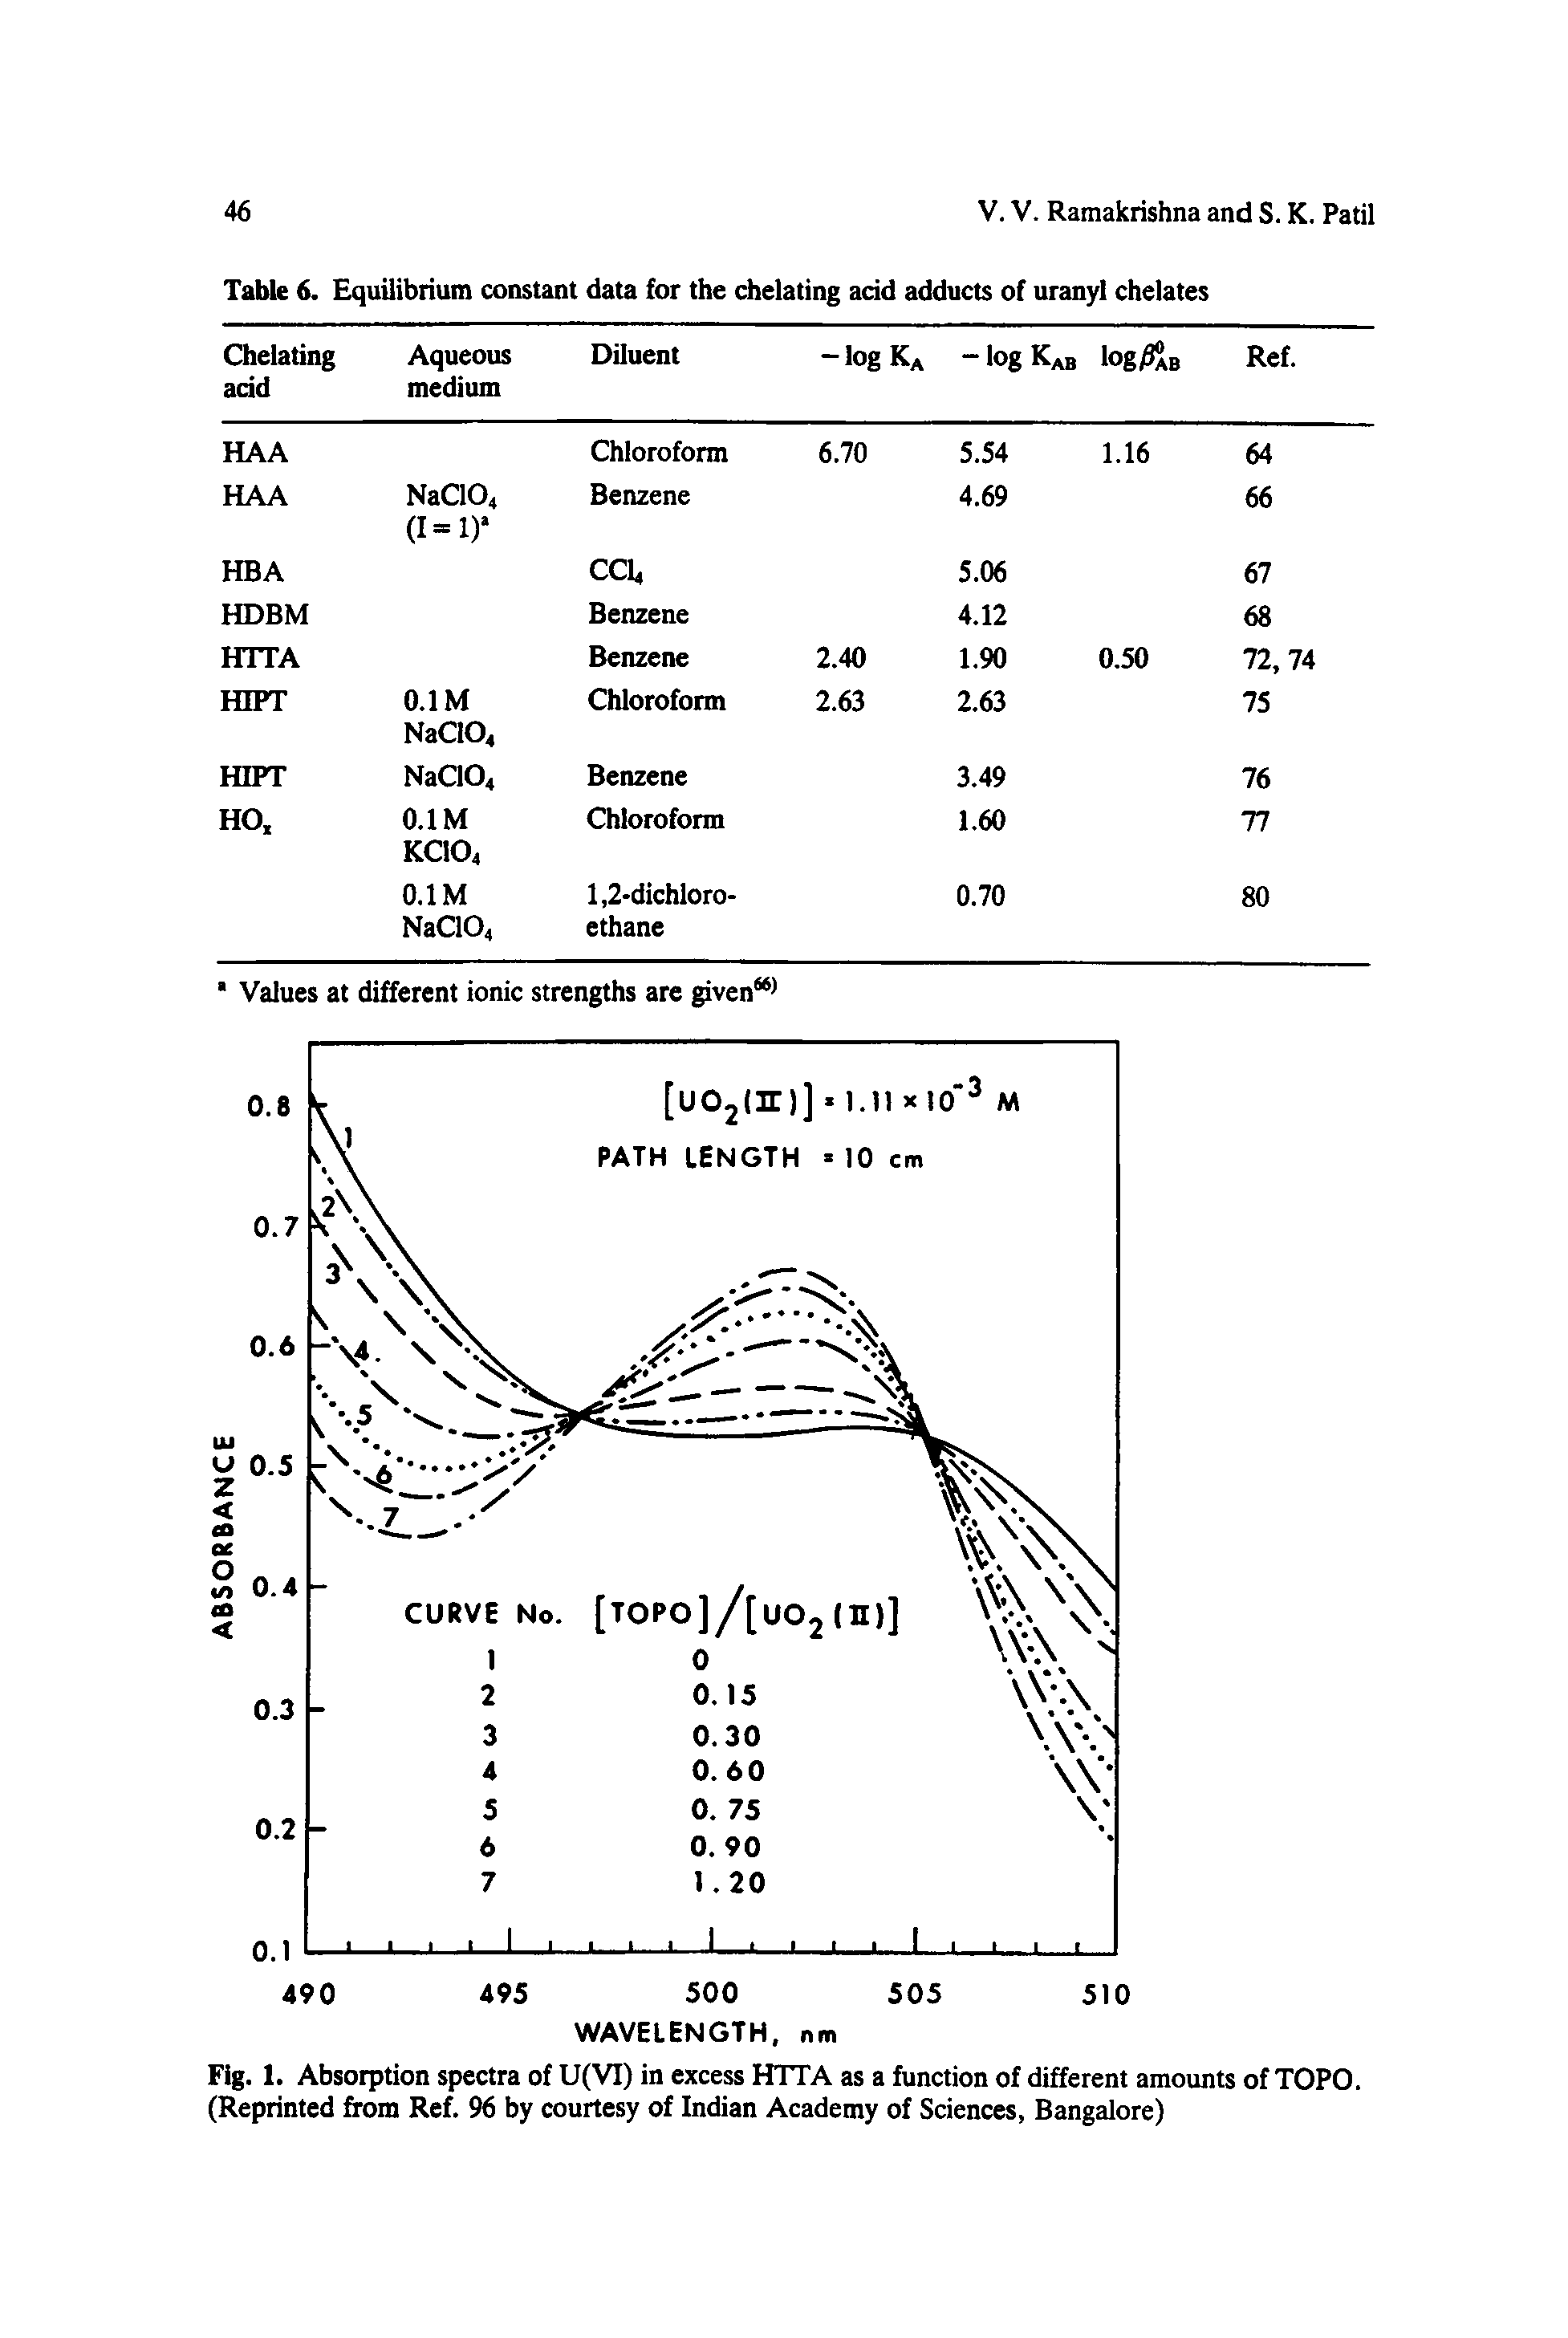 Table 6. Equilibrium constant data for the chelating acid adducts of uranyl chelates...